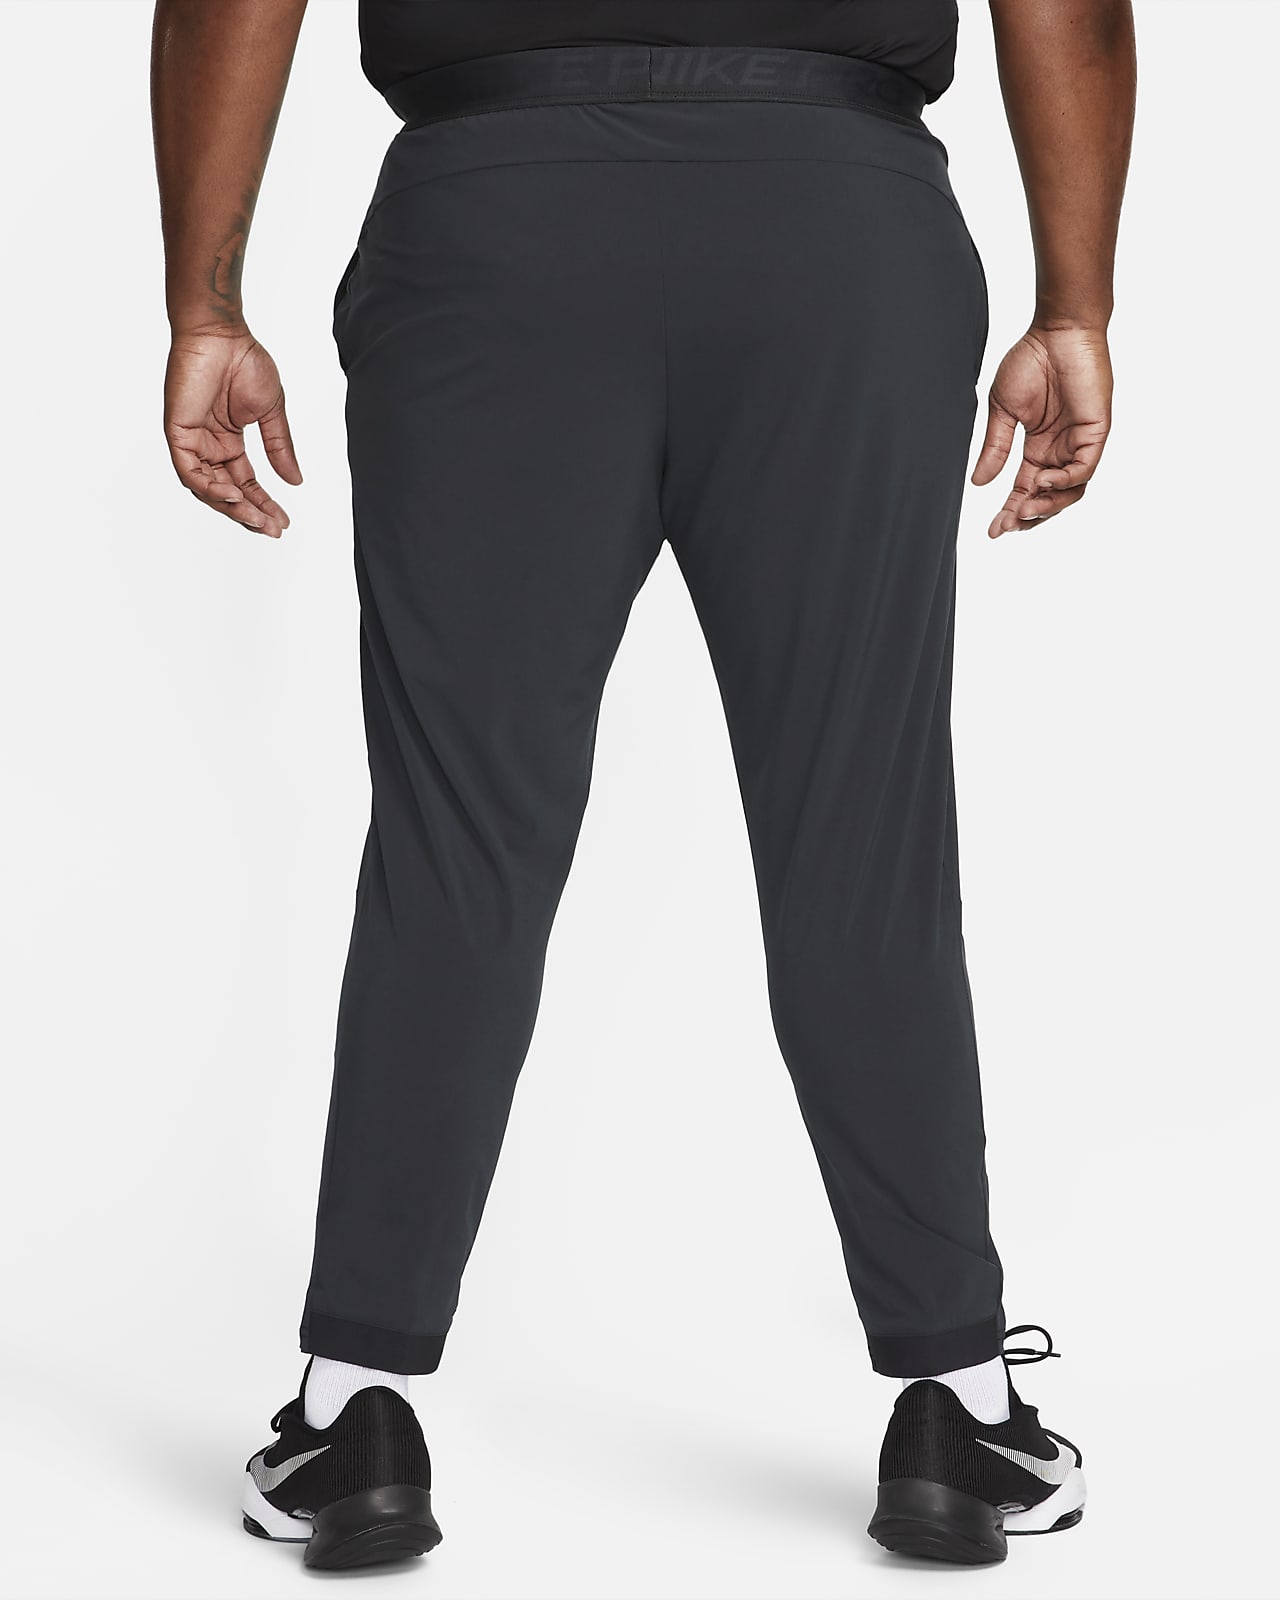 Nike Pro Hypercool Grey and Black Space dyed Neutral mesh athletic